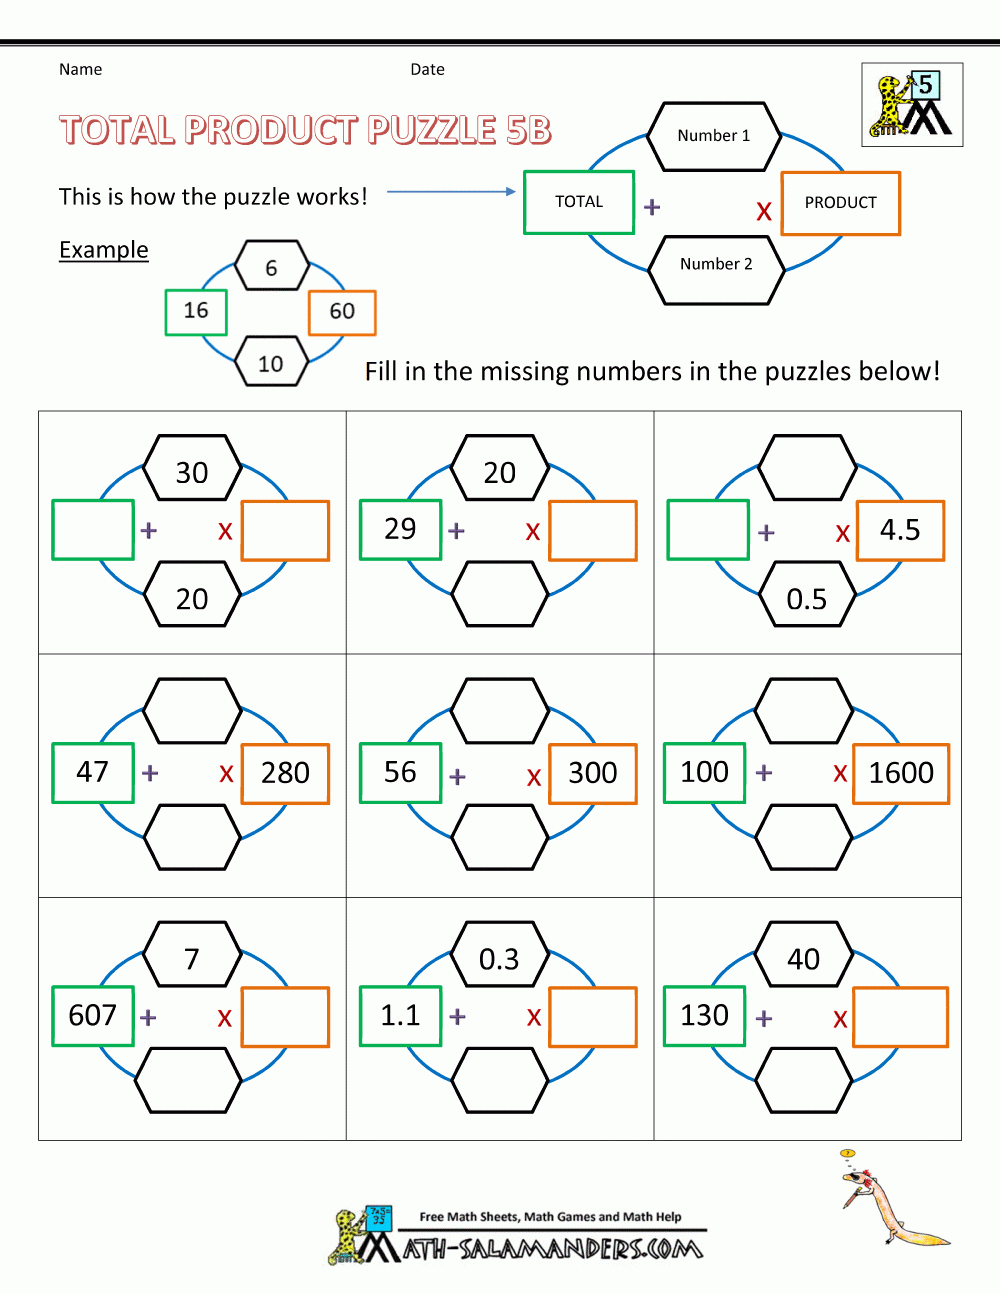 Multiplication-Puzzles-Printable-Total-Product-Puzzle-5B.gif intended for Free Printable Multiplication Riddle Worksheets